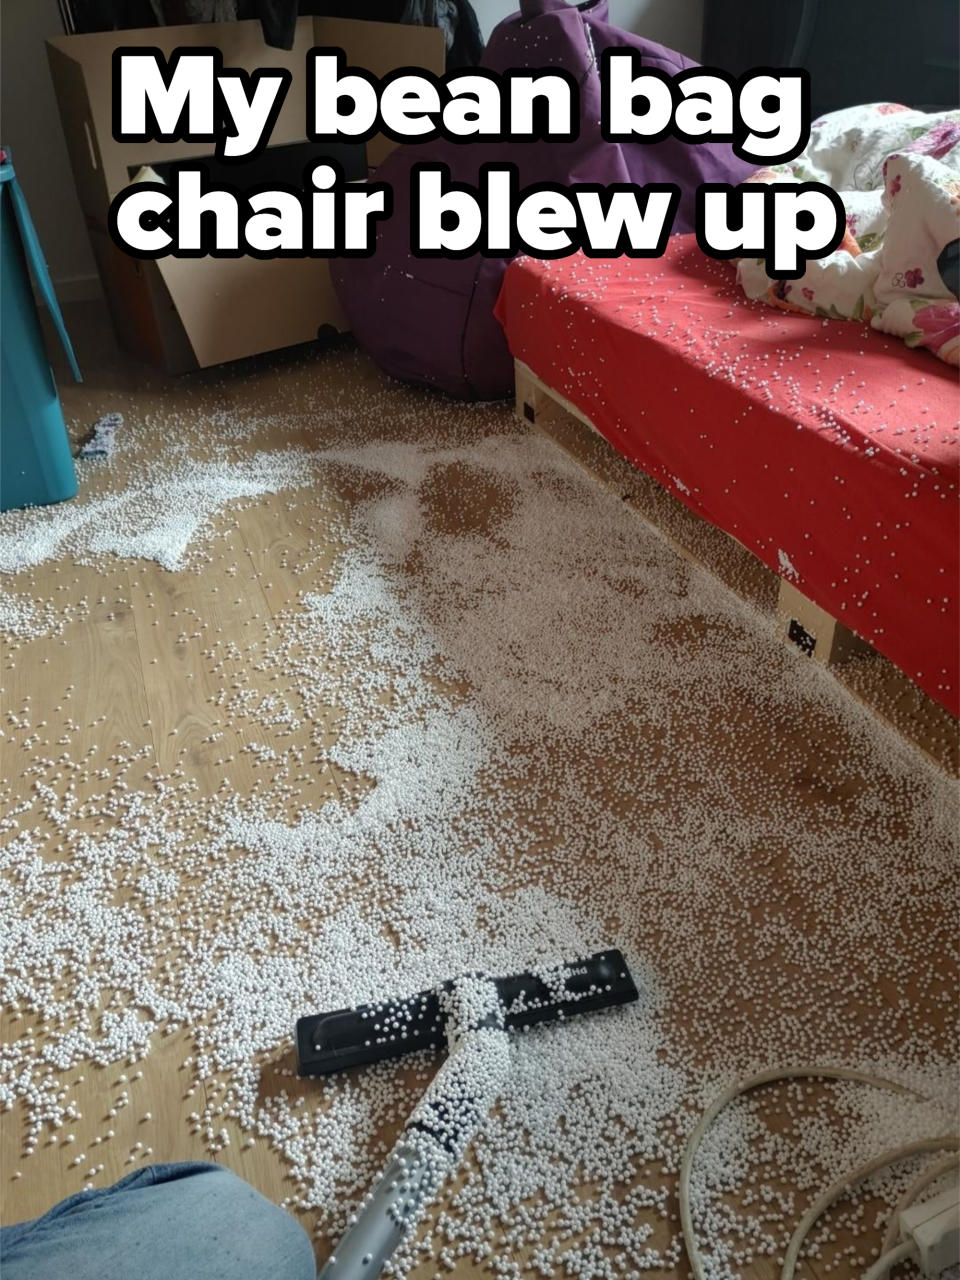 A vacuum cleaner is used to clean up a large amount of white foam beads scattered across a bedroom floor, with a messy bed and boxes in the background